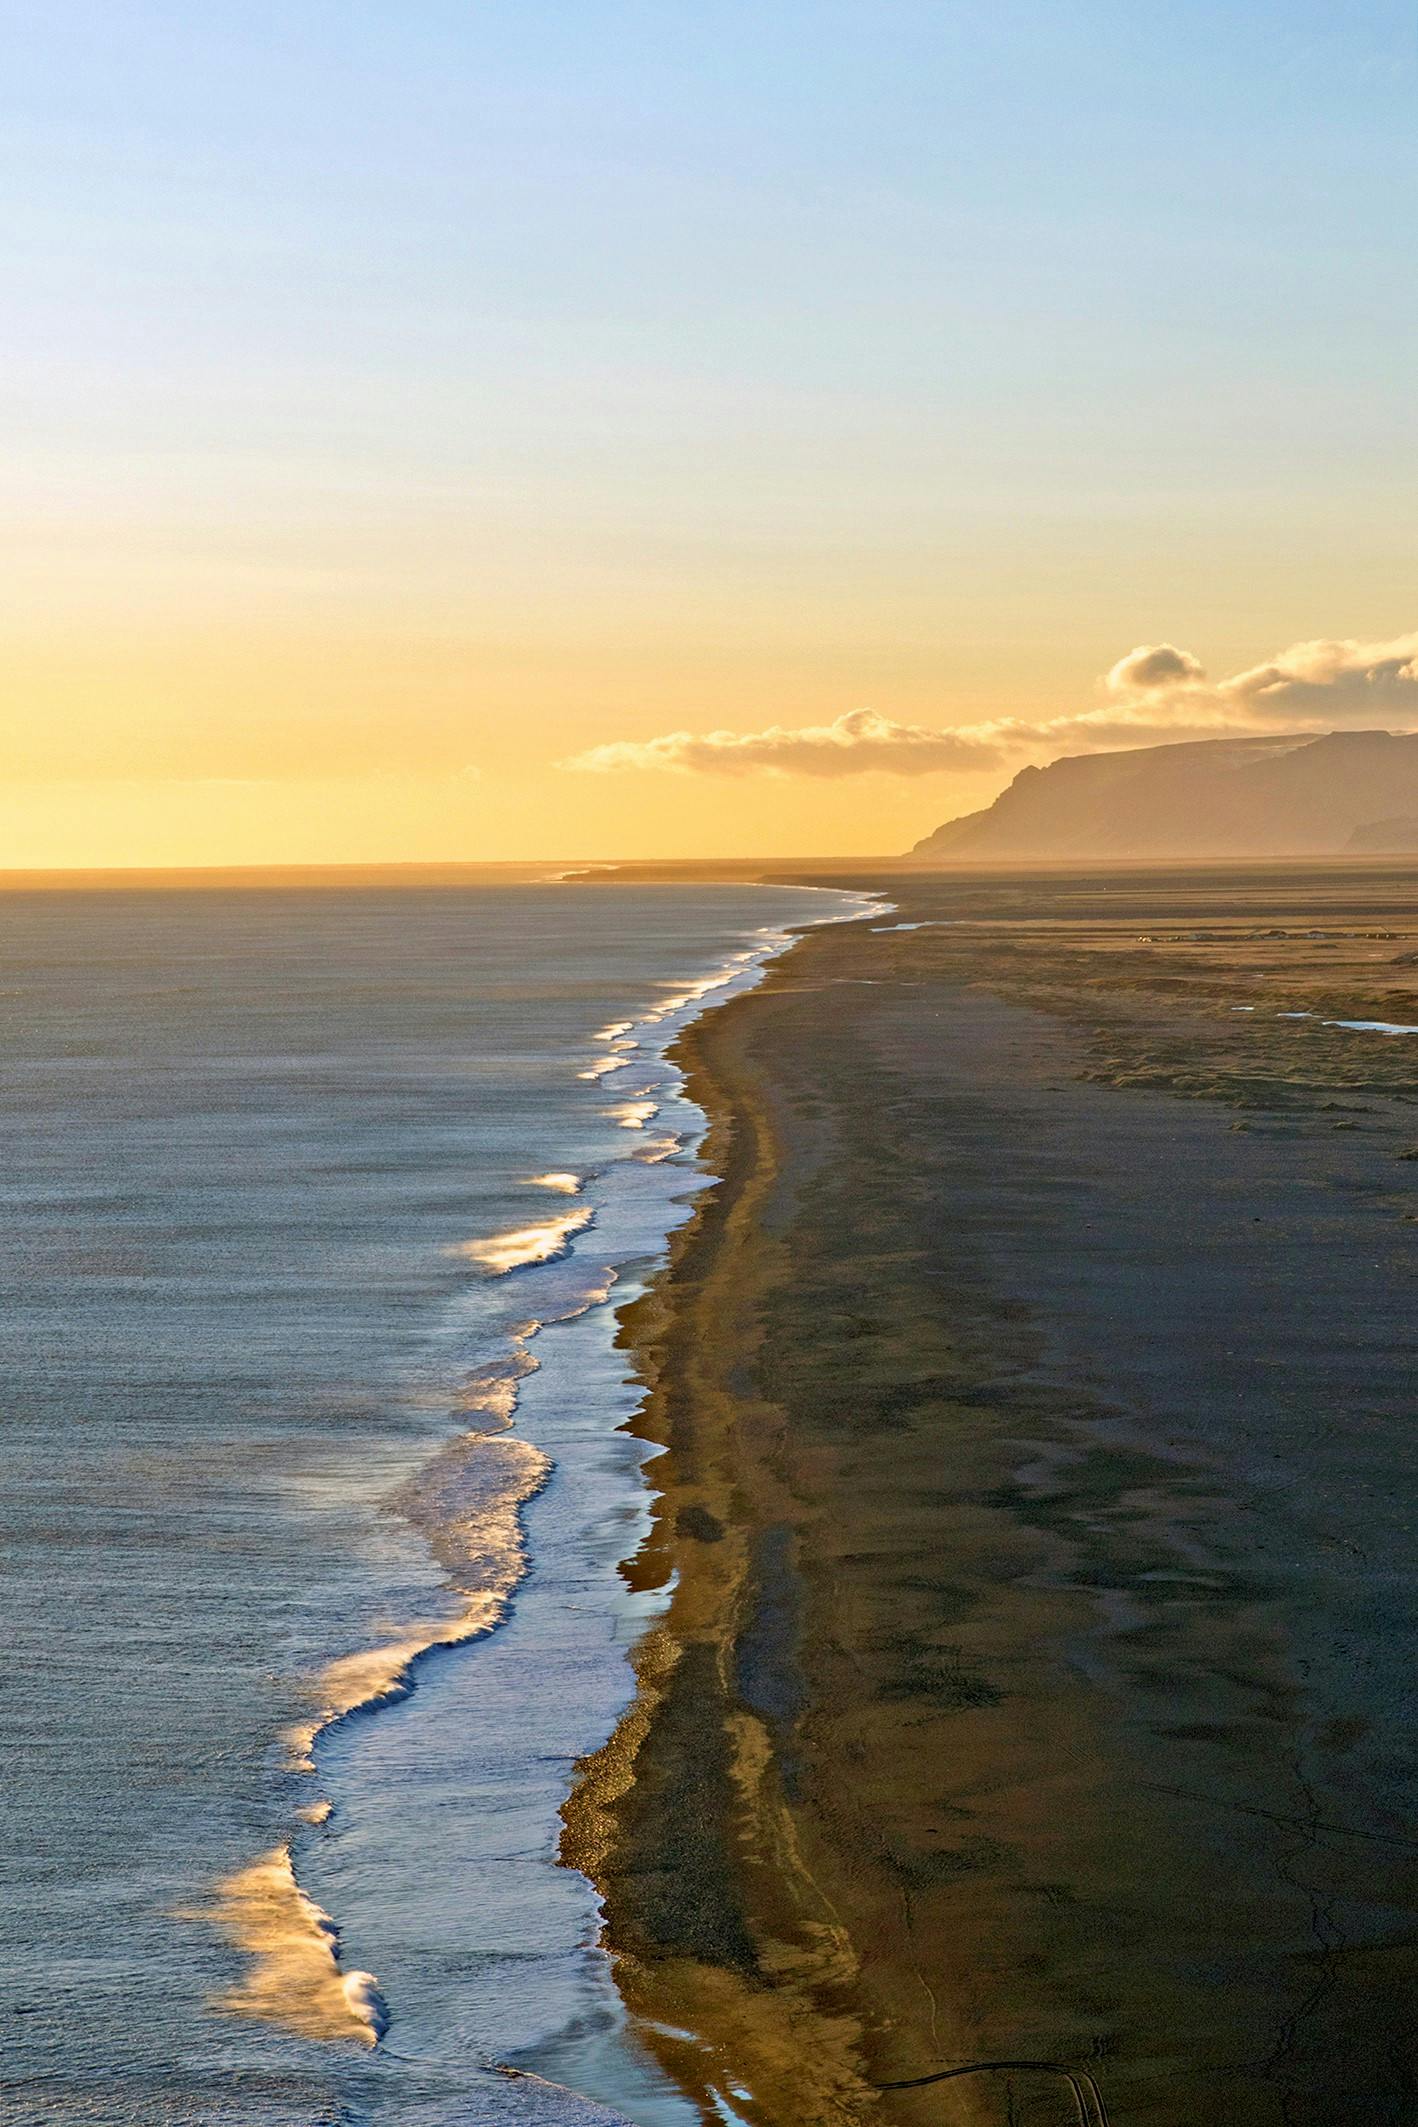 Icelandic Landscapes like Black Sand Beach helped inspire Tolkien's Middle Earth.